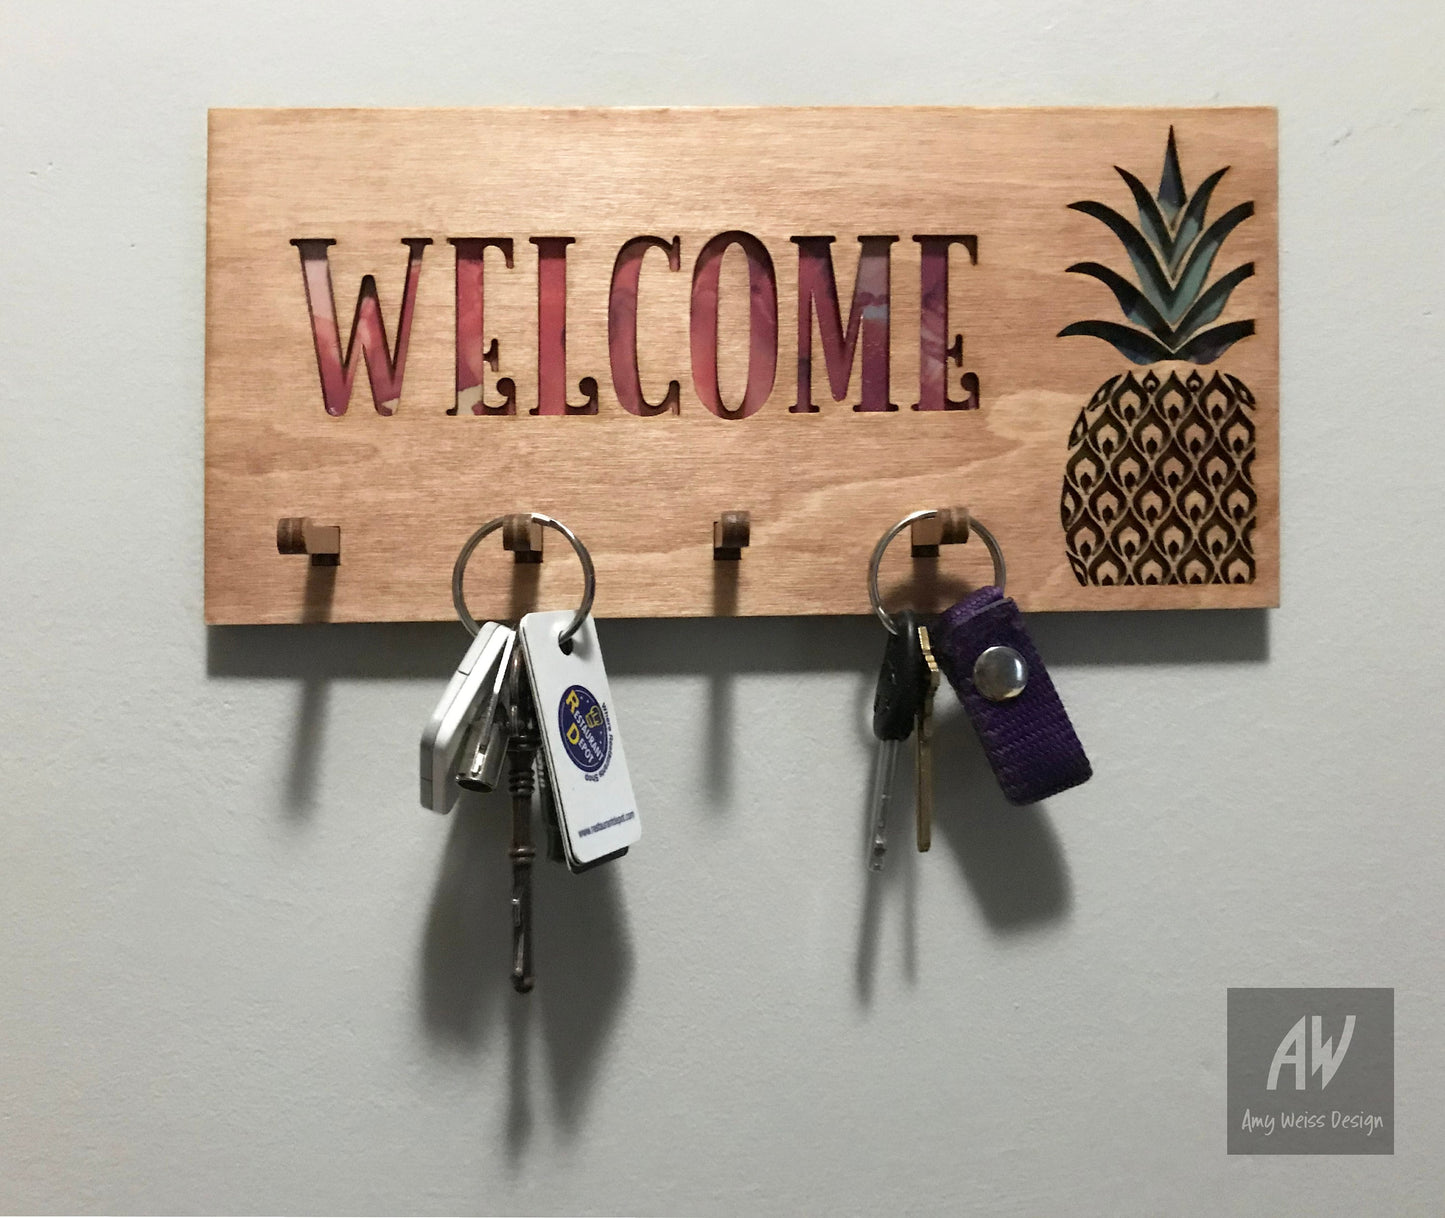 Key holder with the word "Welcome" and pineapple cutout. Red,  yellow, and green showing through the holes. 4 pegs with keys on them.